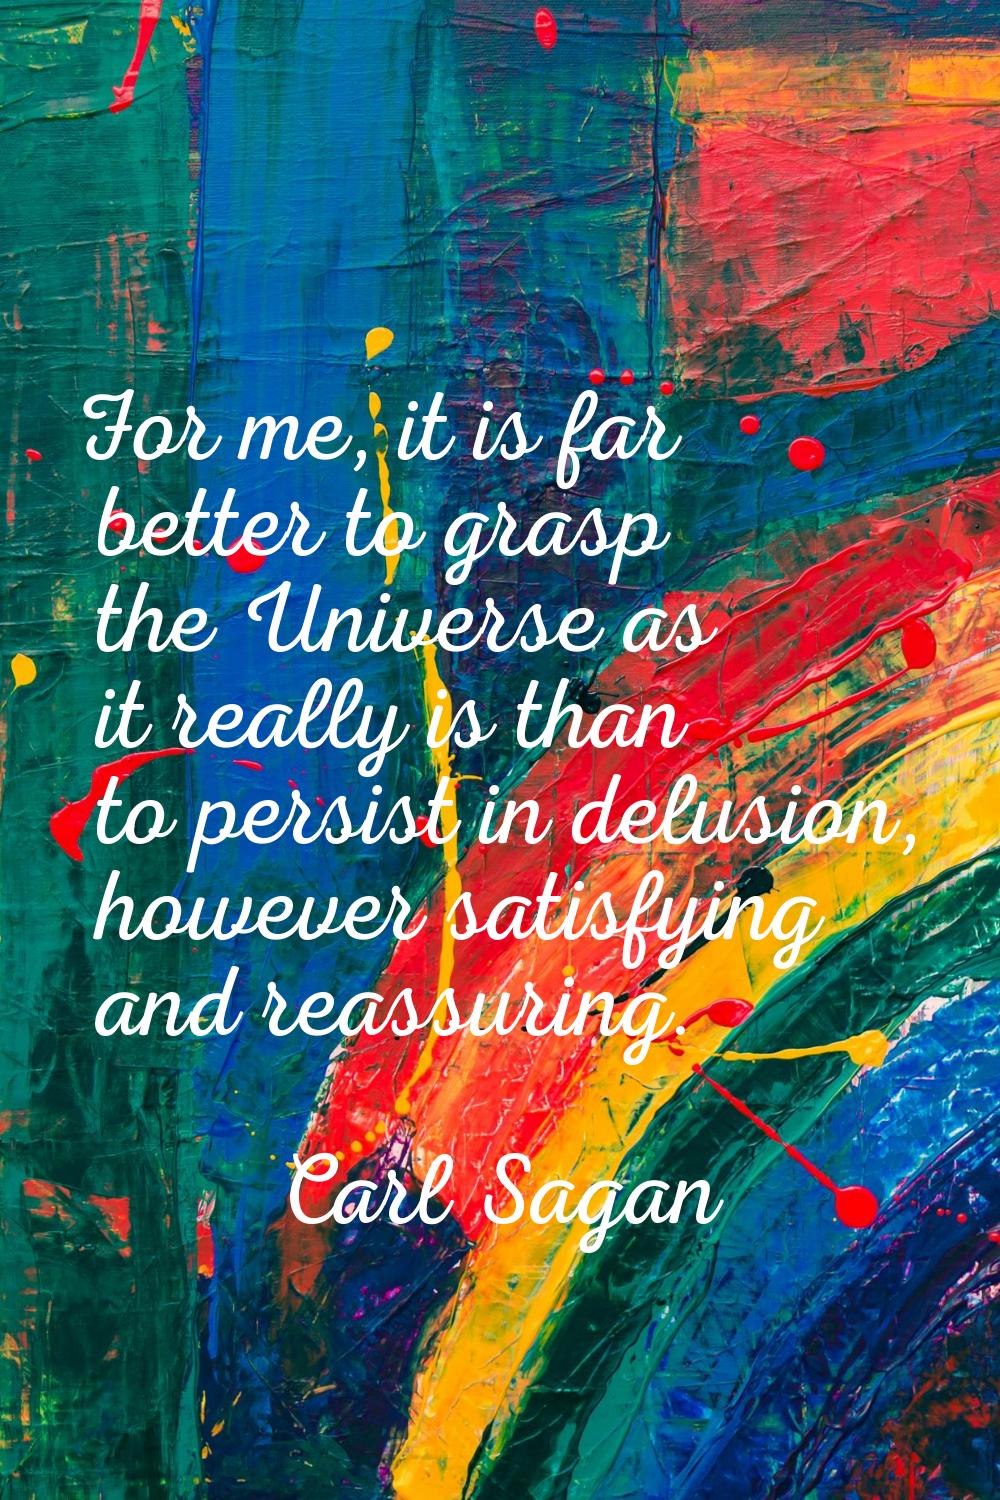 For me, it is far better to grasp the Universe as it really is than to persist in delusion, however